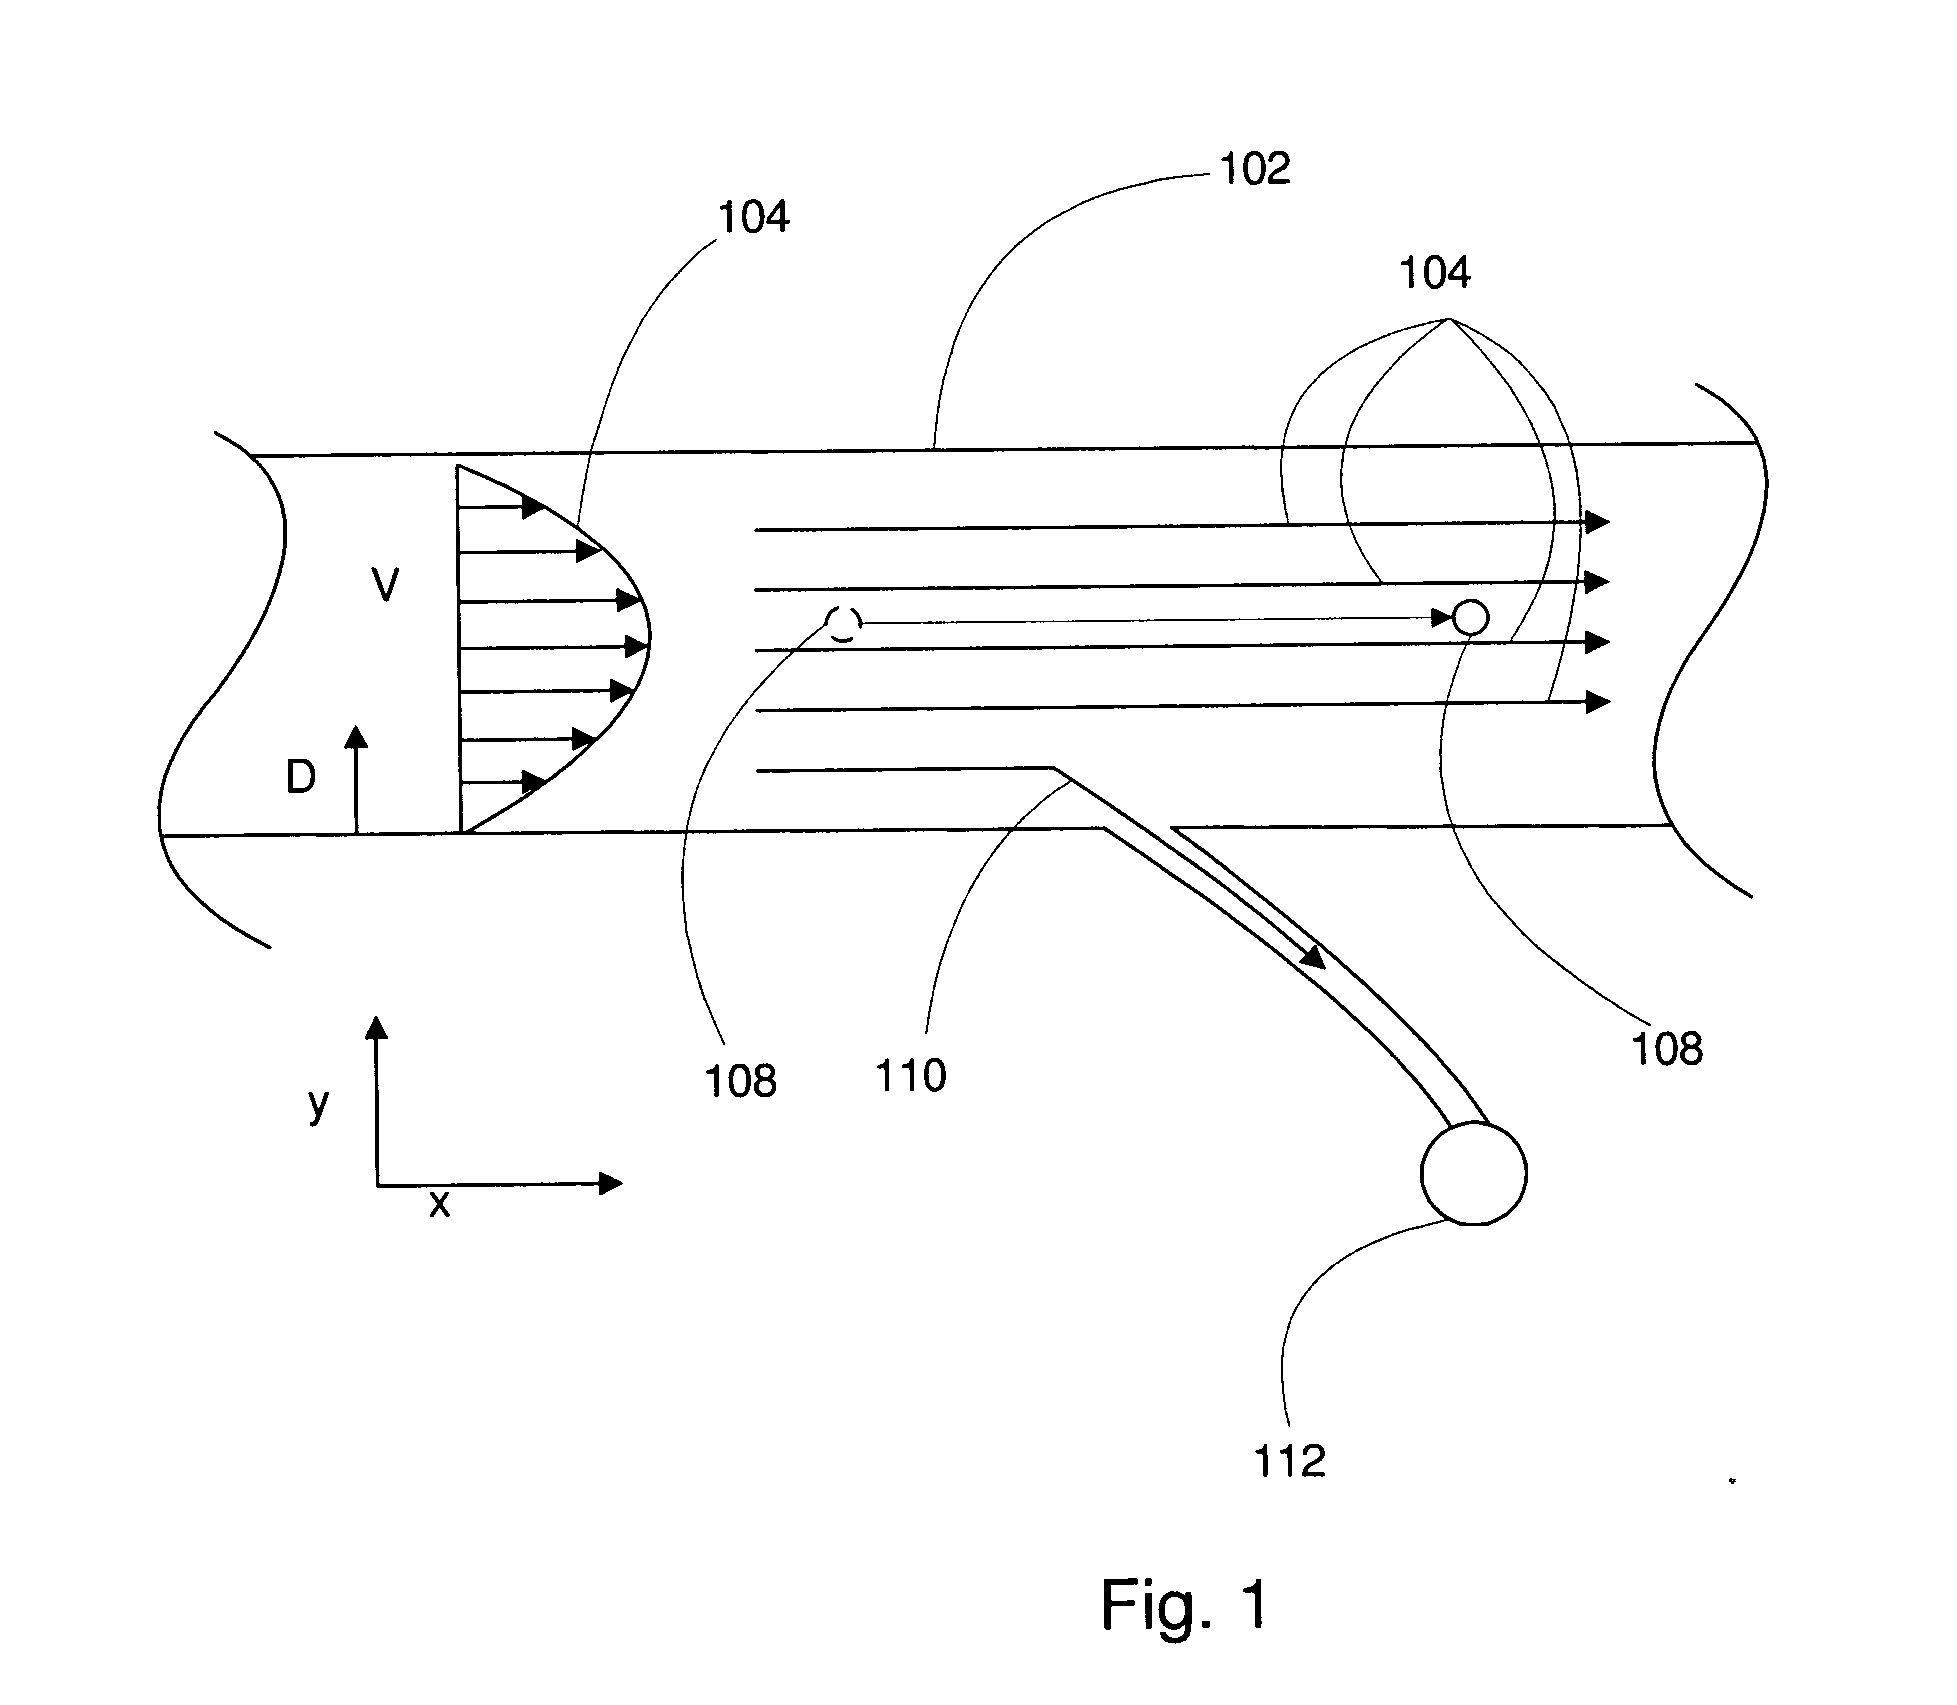 Programmed pulsed infusion methods and devices